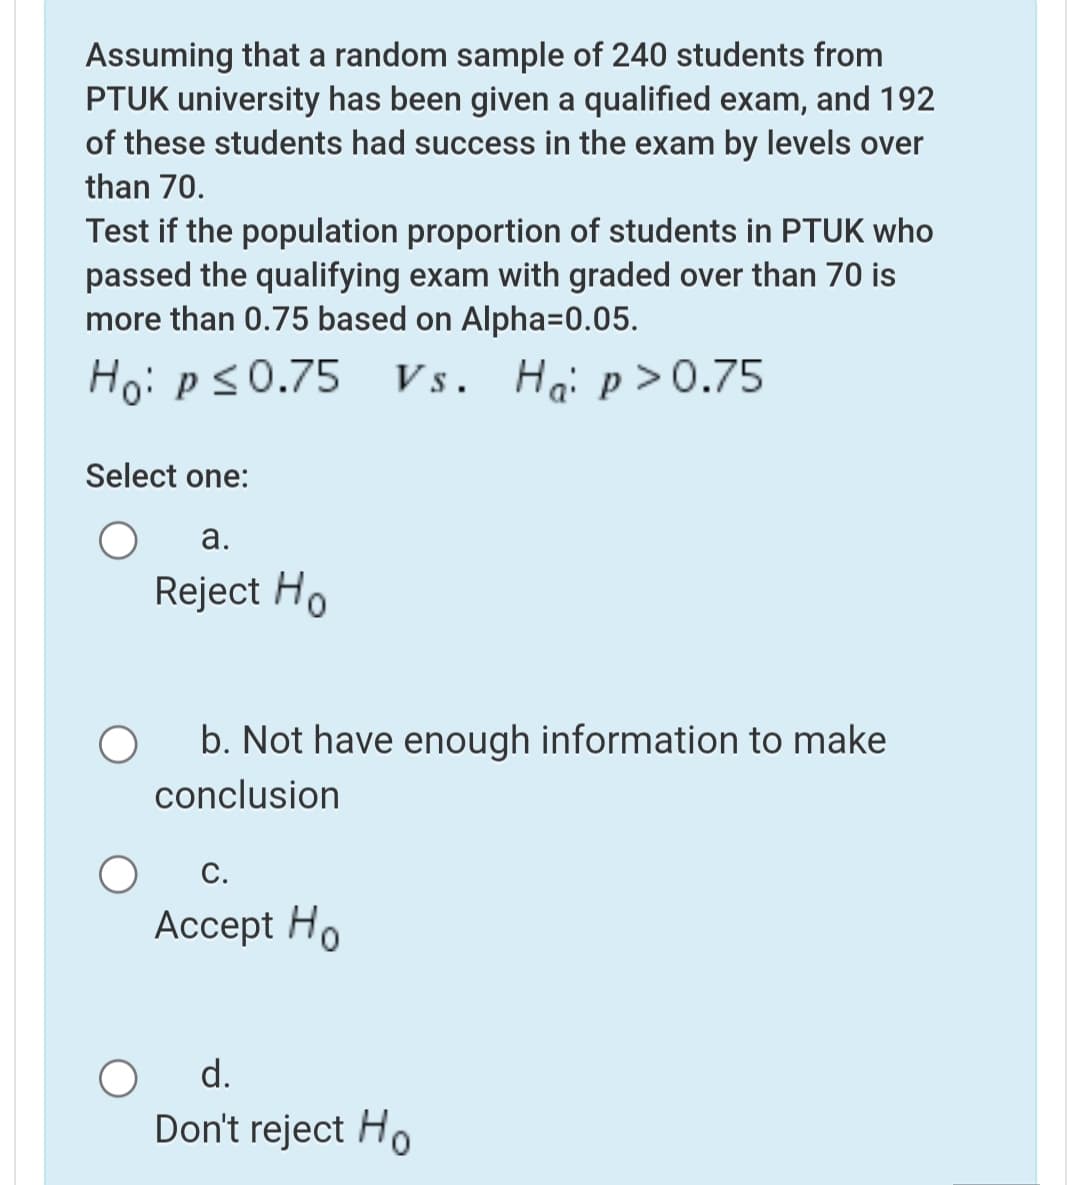 Assuming that a random sample of 240 students from
PTUK university has been given a qualified exam, and 192
of these students had success in the exam by levels over
than 70.
Test if the population proportion of students in PTUK who
passed the qualifying exam with graded over than 70 is
more than 0.75 based on Alpha=0.05.
Ho: ps0.75 Vs. Ha: p>0.75
Select one:
а.
Reject Ho
b. Not have enough information to make
conclusion
С.
Аcсept Ho
d.
Don't reject Ho
